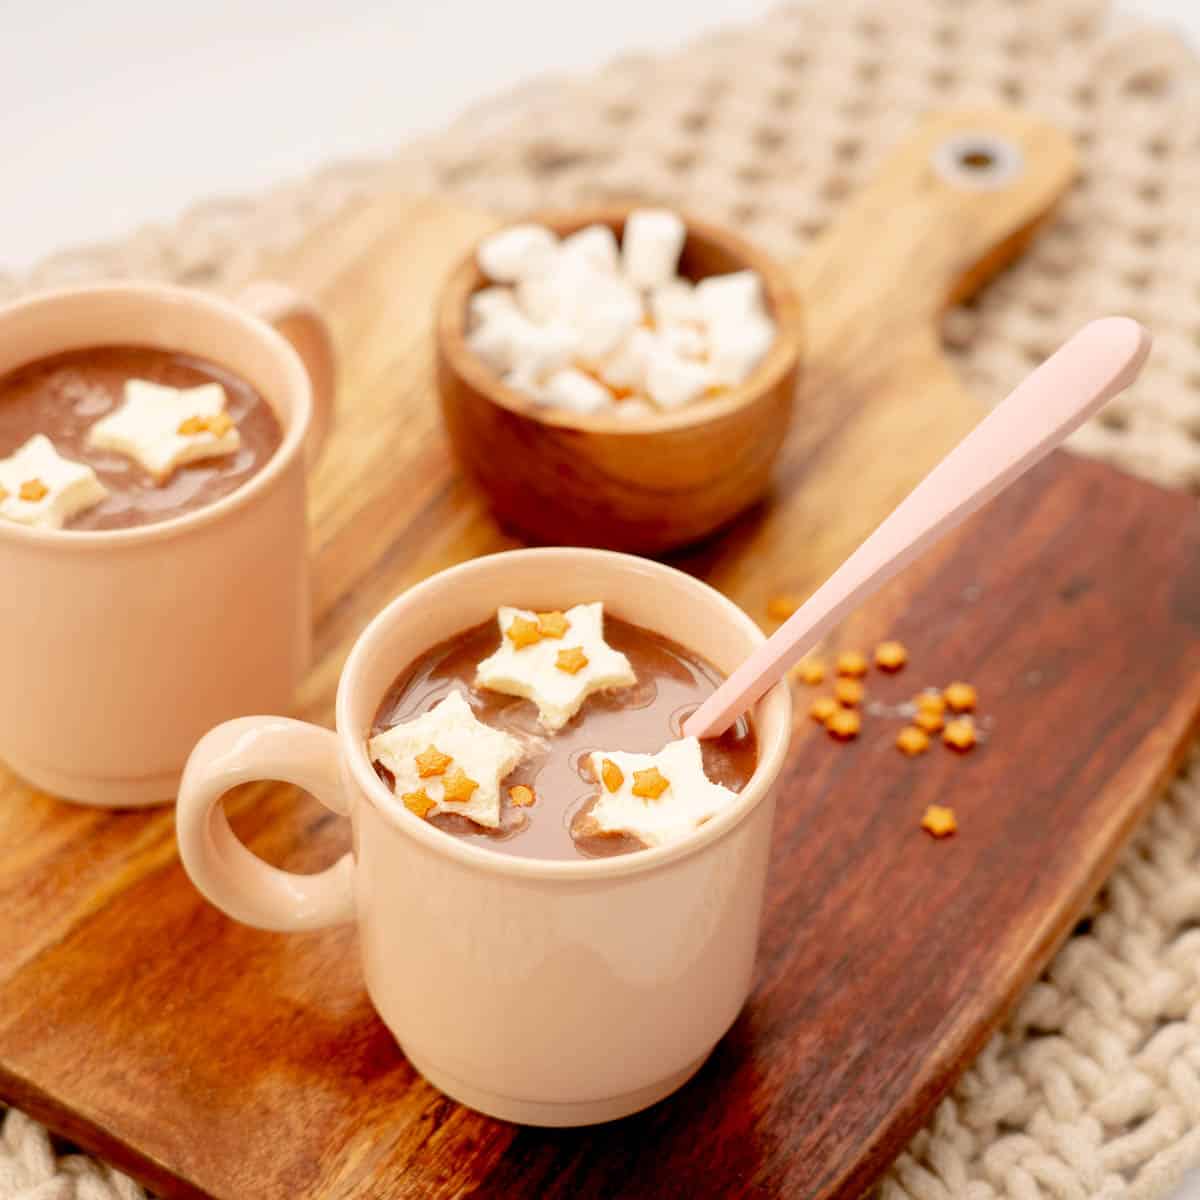 Improve Your Hot Cocoa Game with These Cocoa Toppers